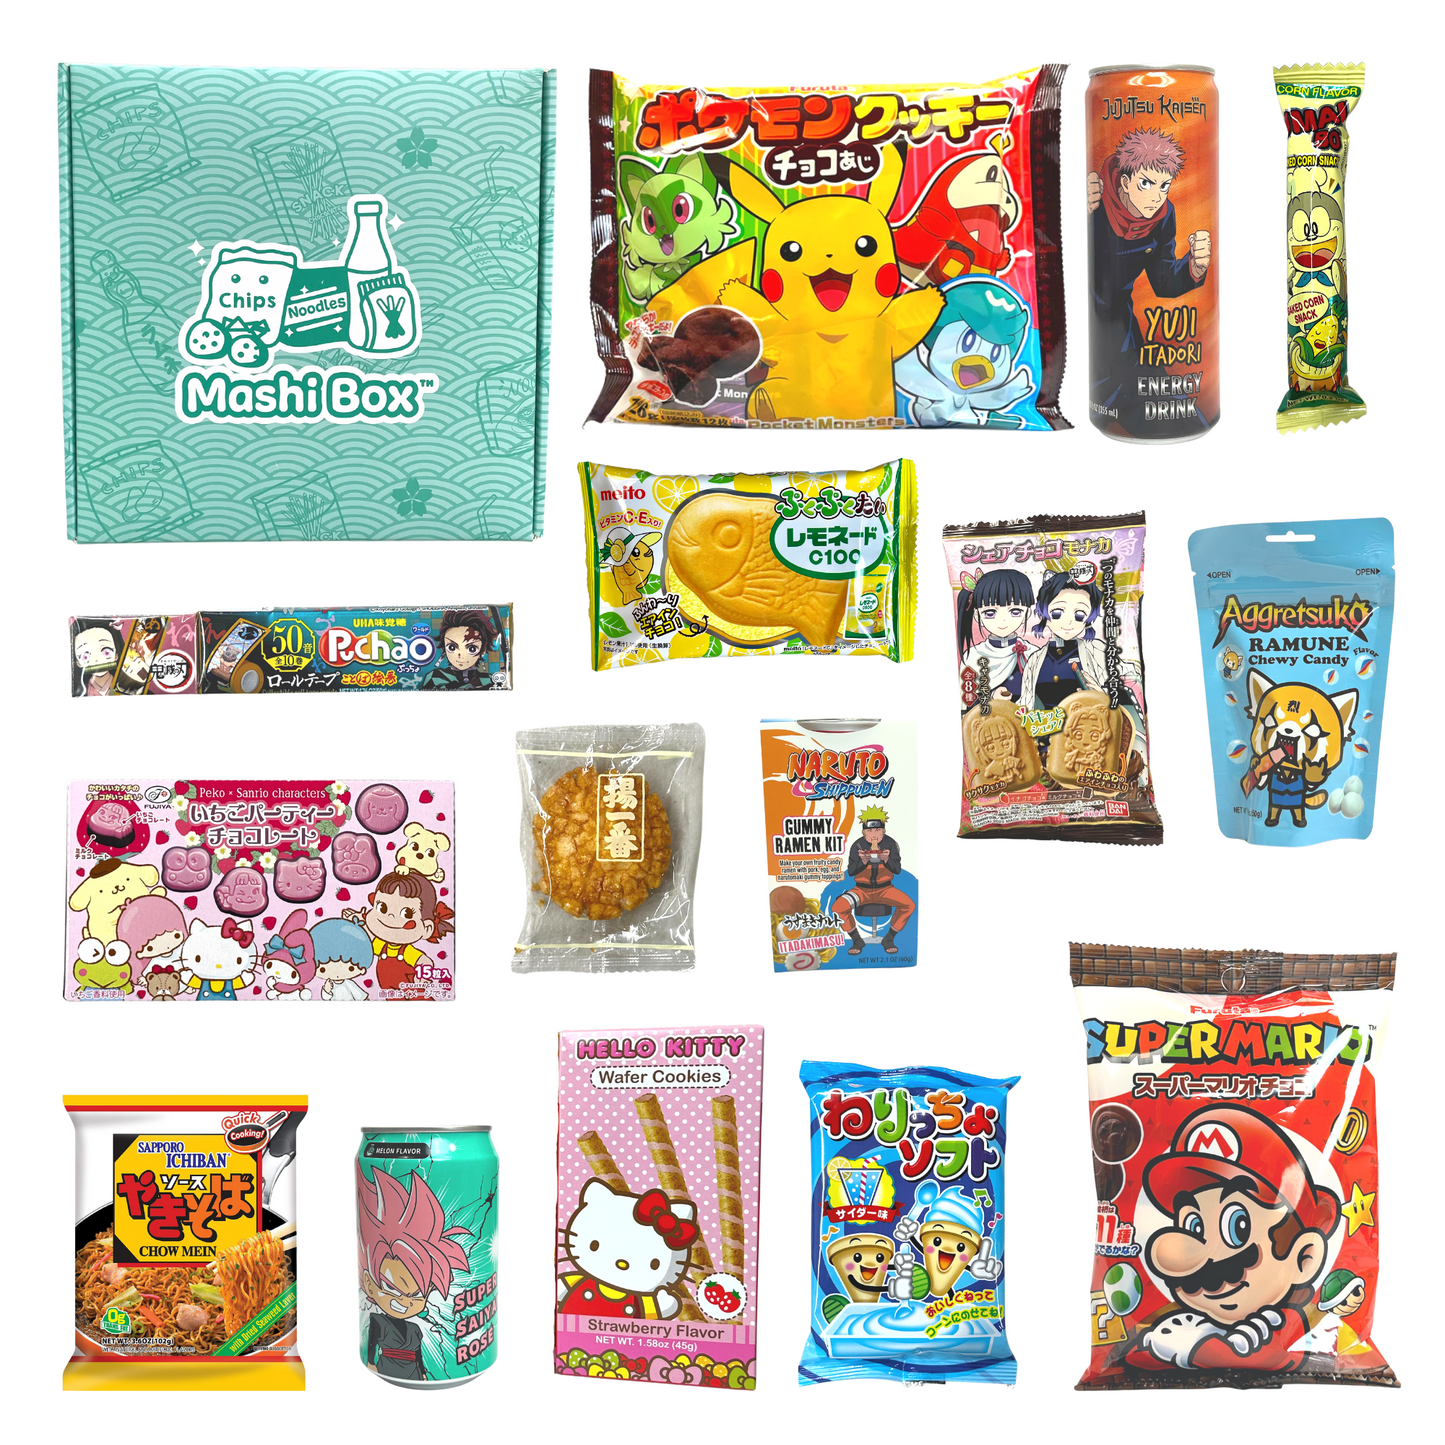 Mashi Box Anime and Japanese Snack Box - Filled with Themed Full-Sized Chips, Drinks, Candy, Snacks and More!